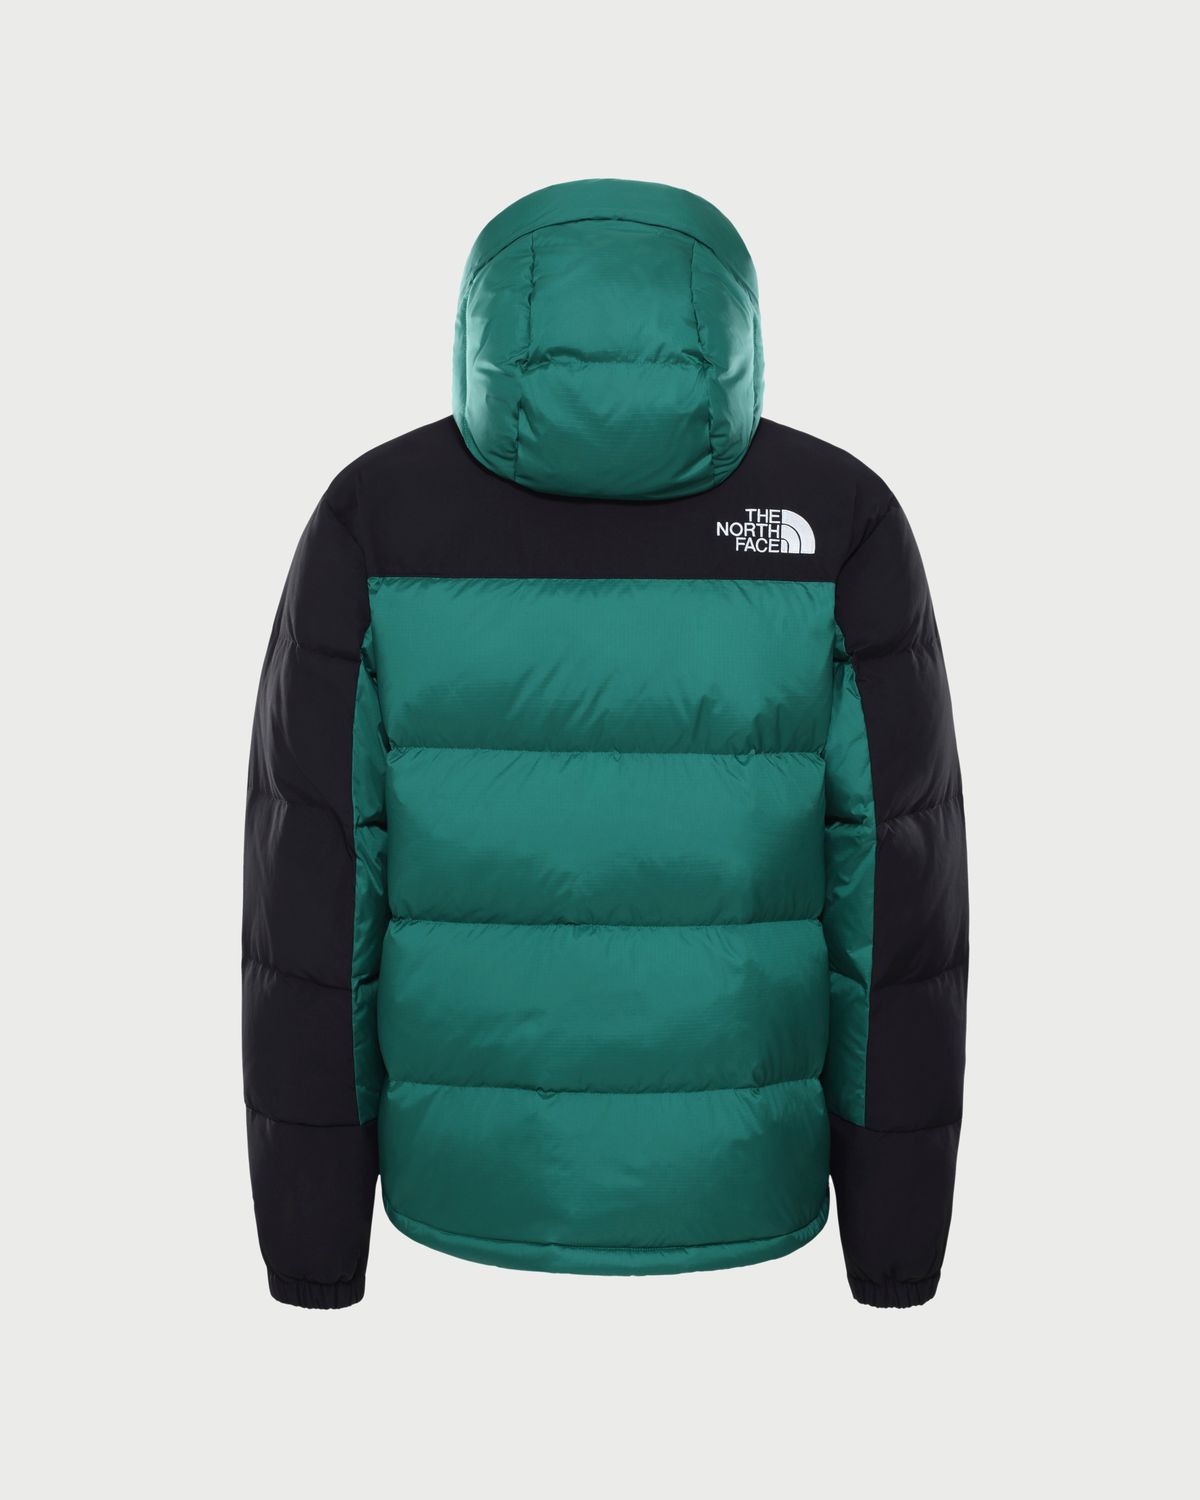 The North Face – Himalayan Down Jacket Peak Evergreen Unisex - Outerwear - Green - Image 2